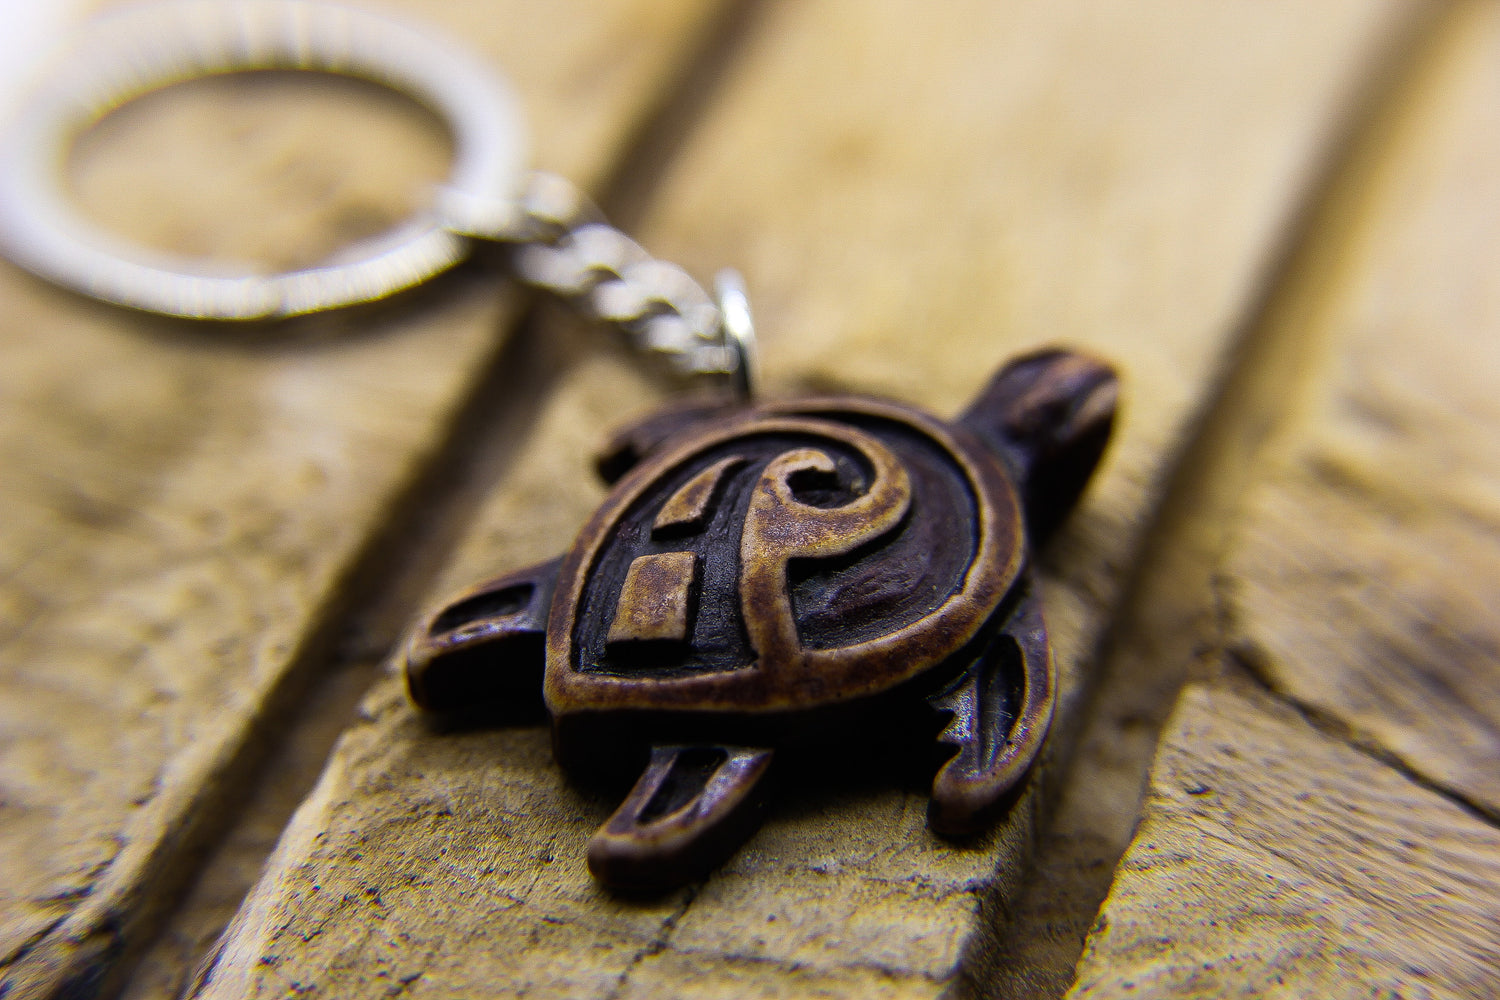 Carved Hawaiian style sea turtle pendant key ring on a piece of wood.  